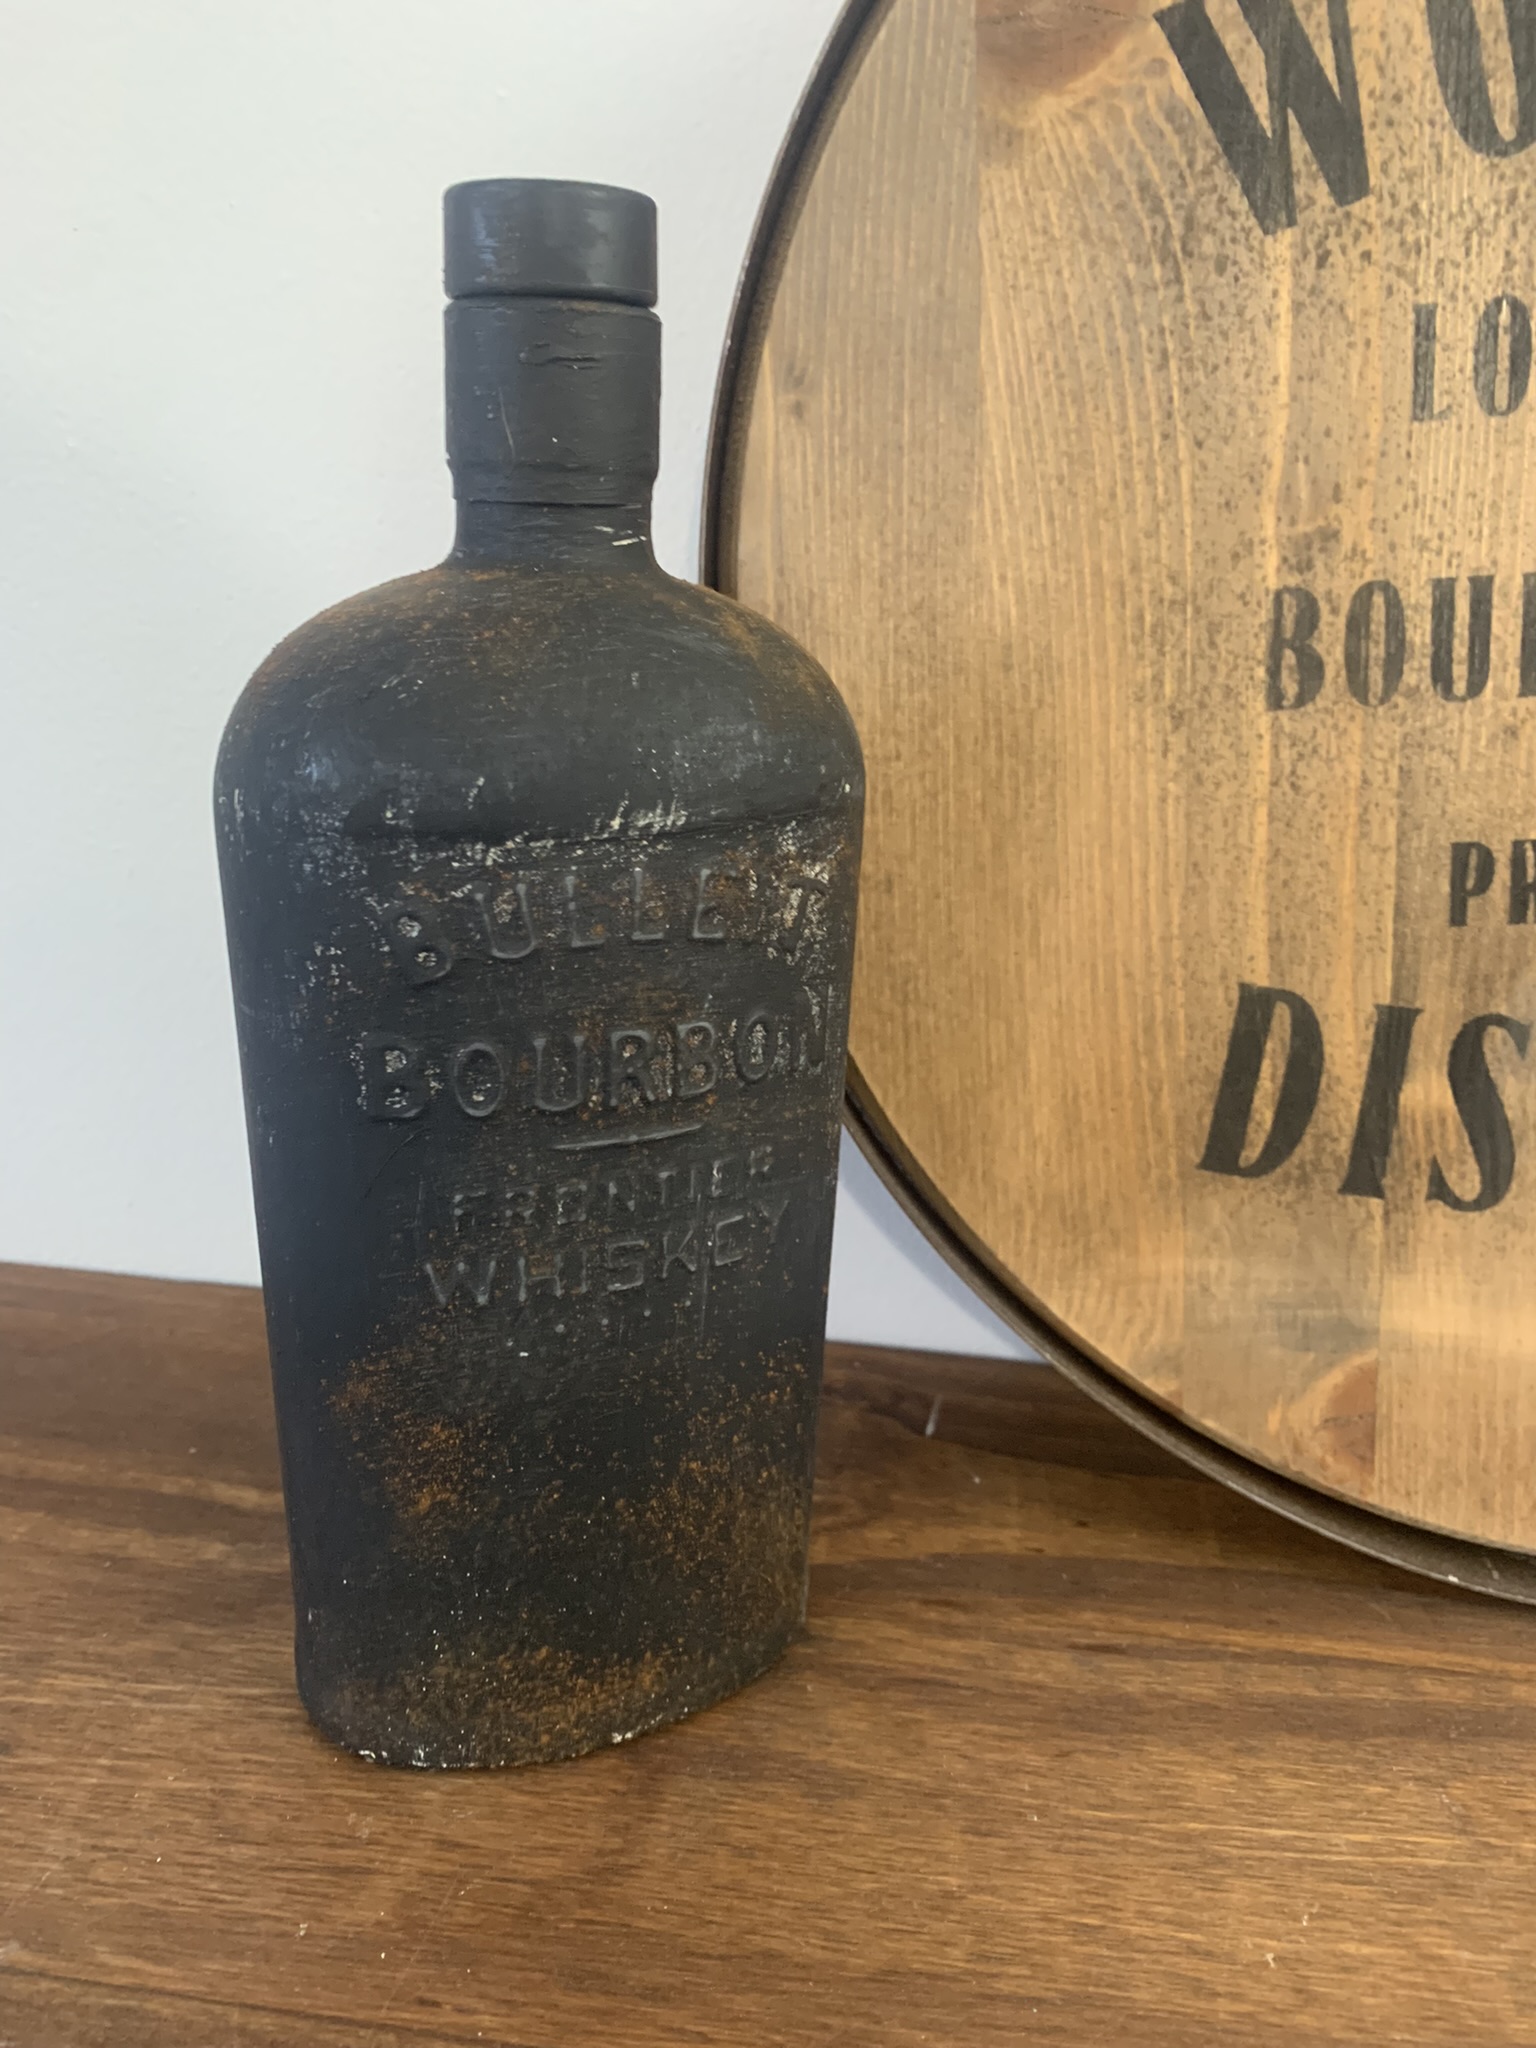 How to Make a Whisky Bottle Look Old